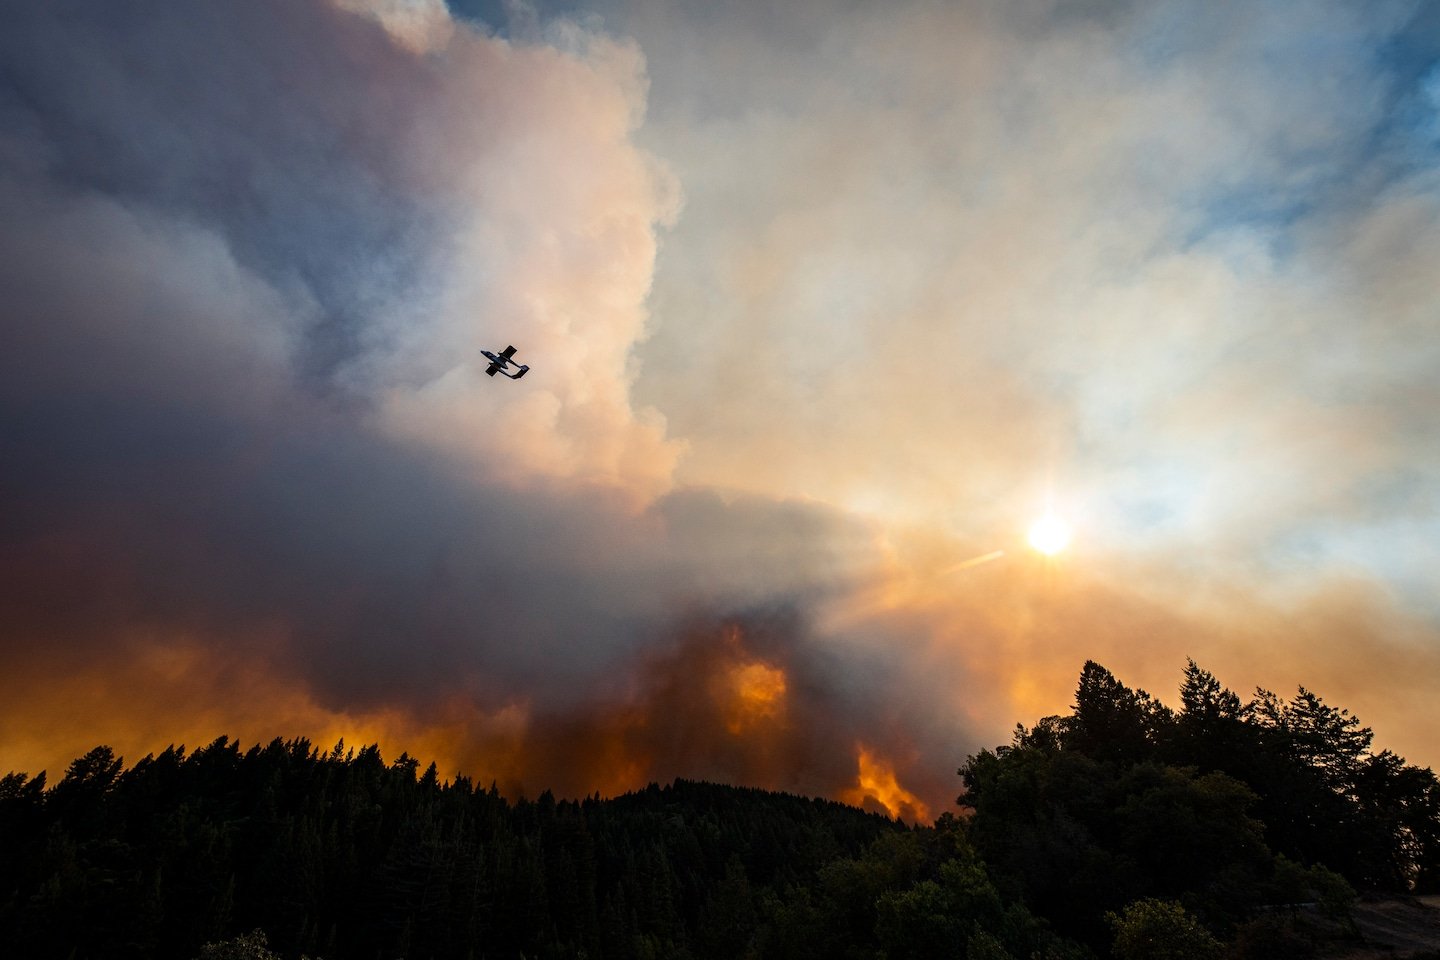 The Biden administration can’t stop wildfires. But it can make them less destructive.